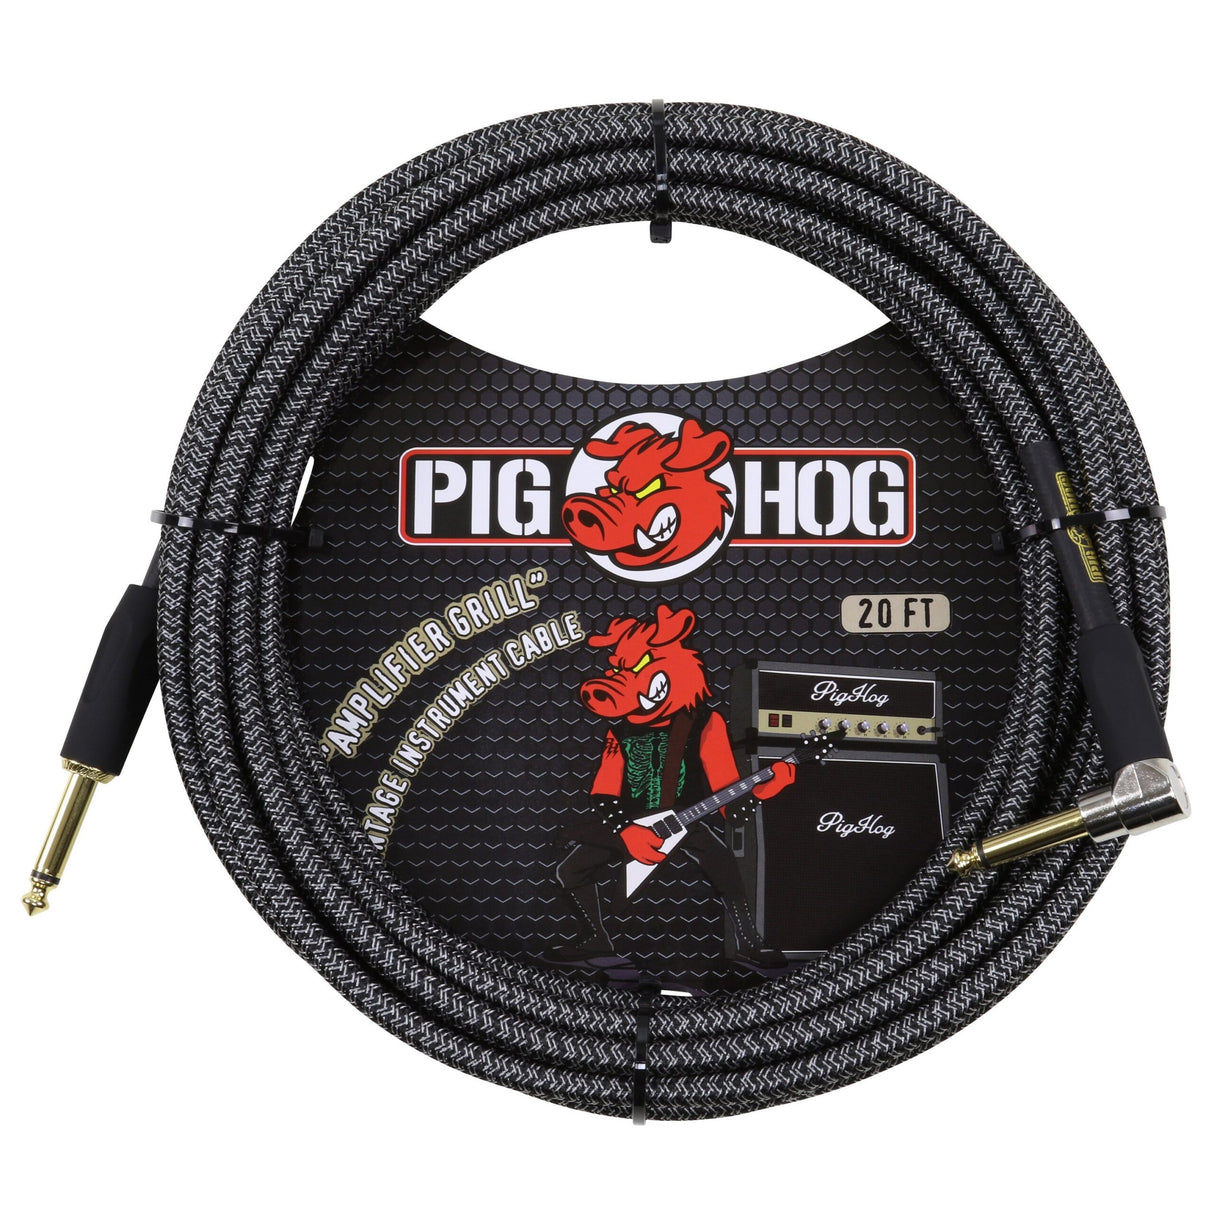 Pig Hog PCH20AGR "Amplifier Grill" Instrument Cable, 20ft. Right Angle